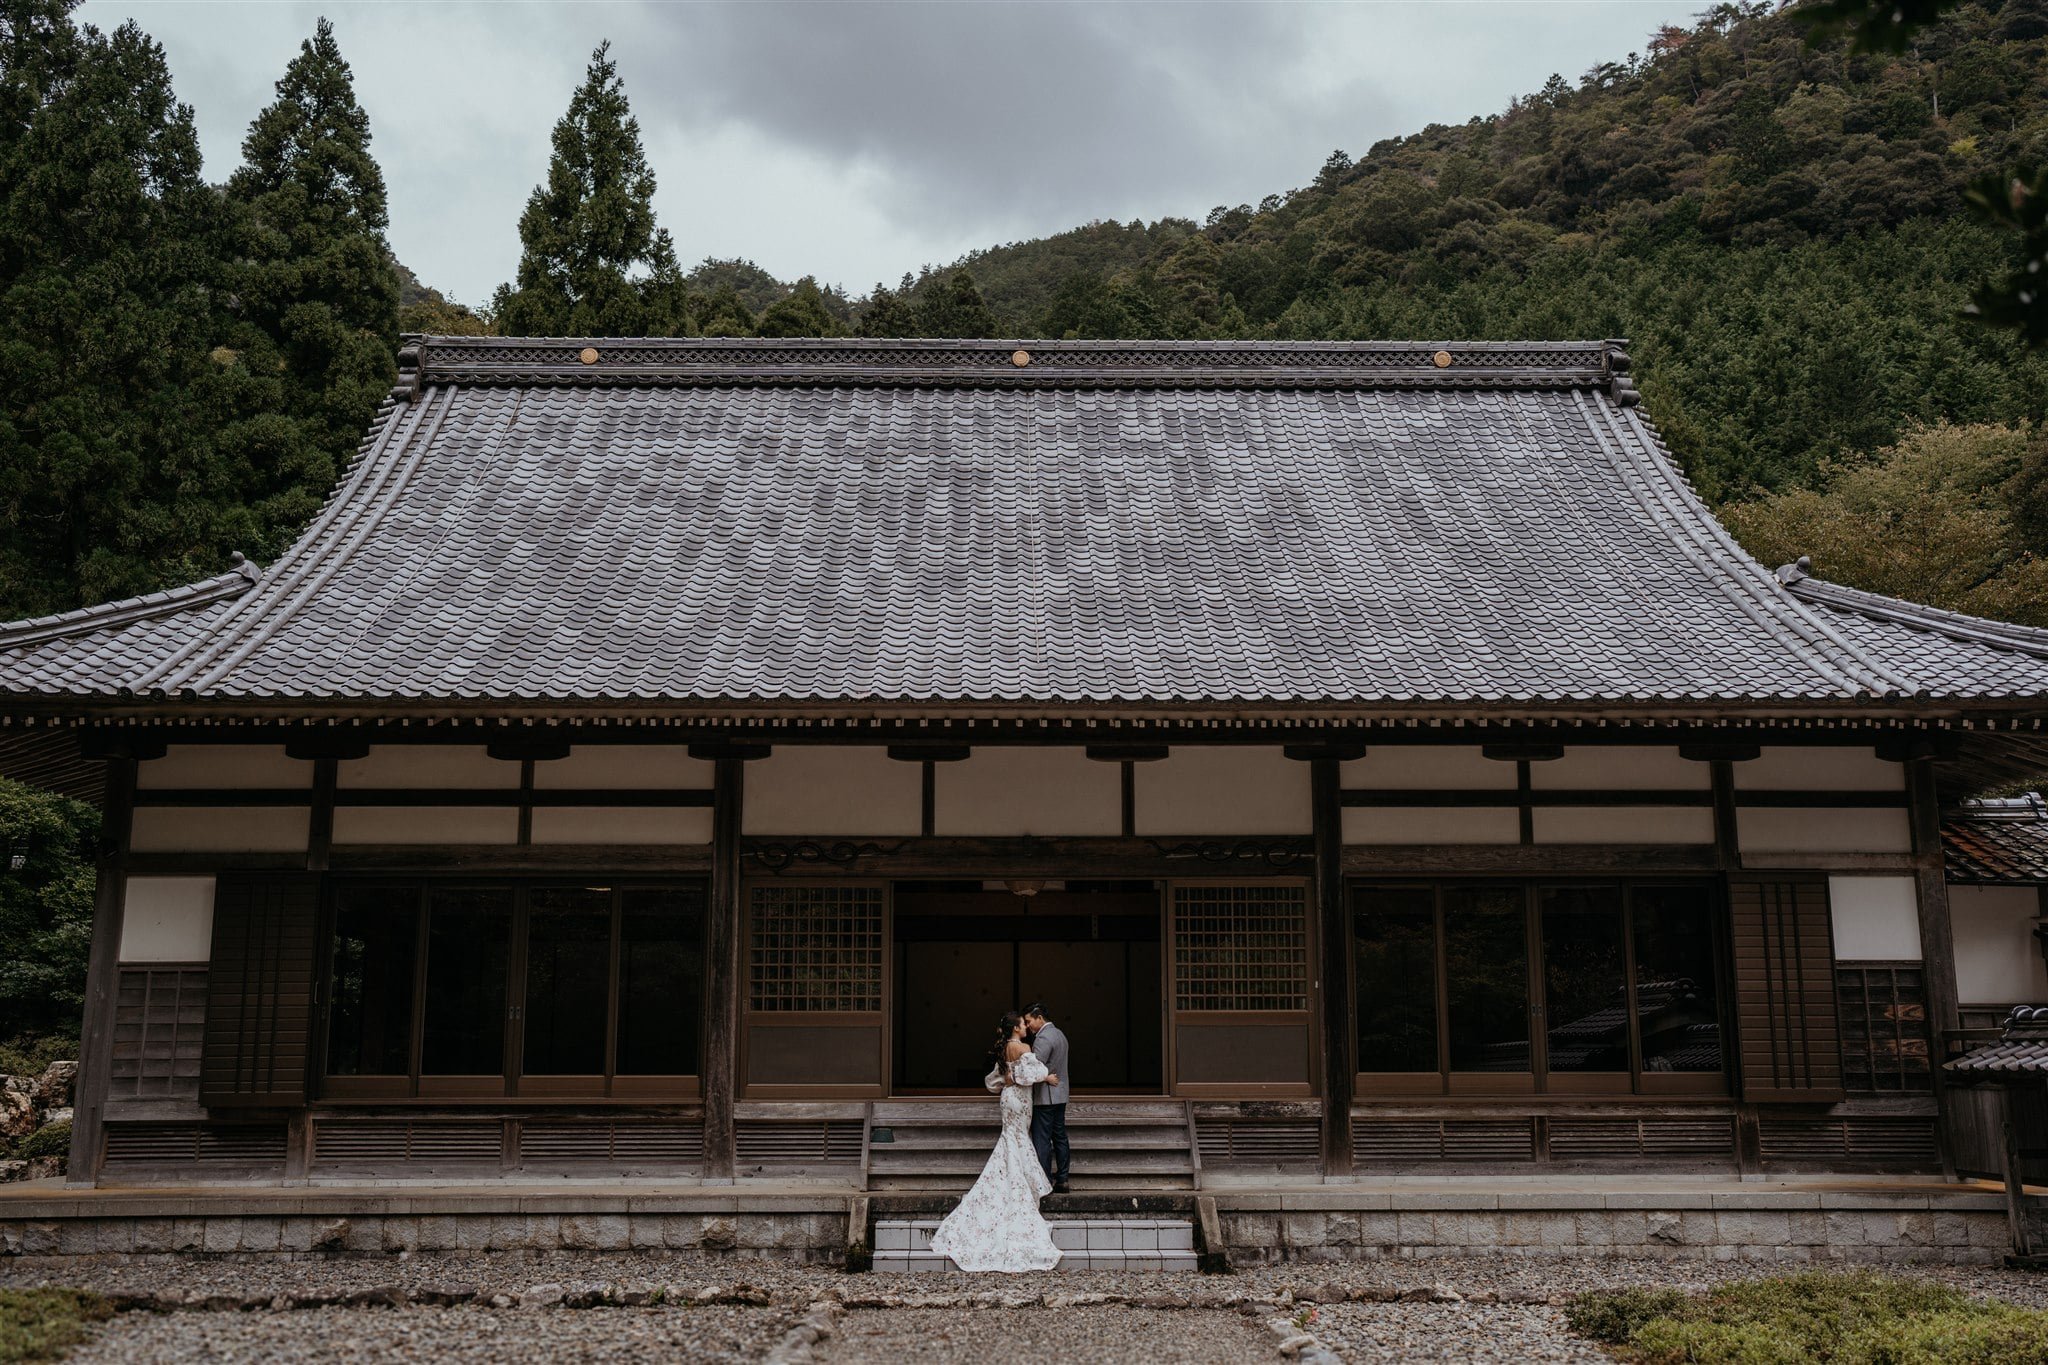 Bride and groom kiss on the steps of a hut during Japan elopement